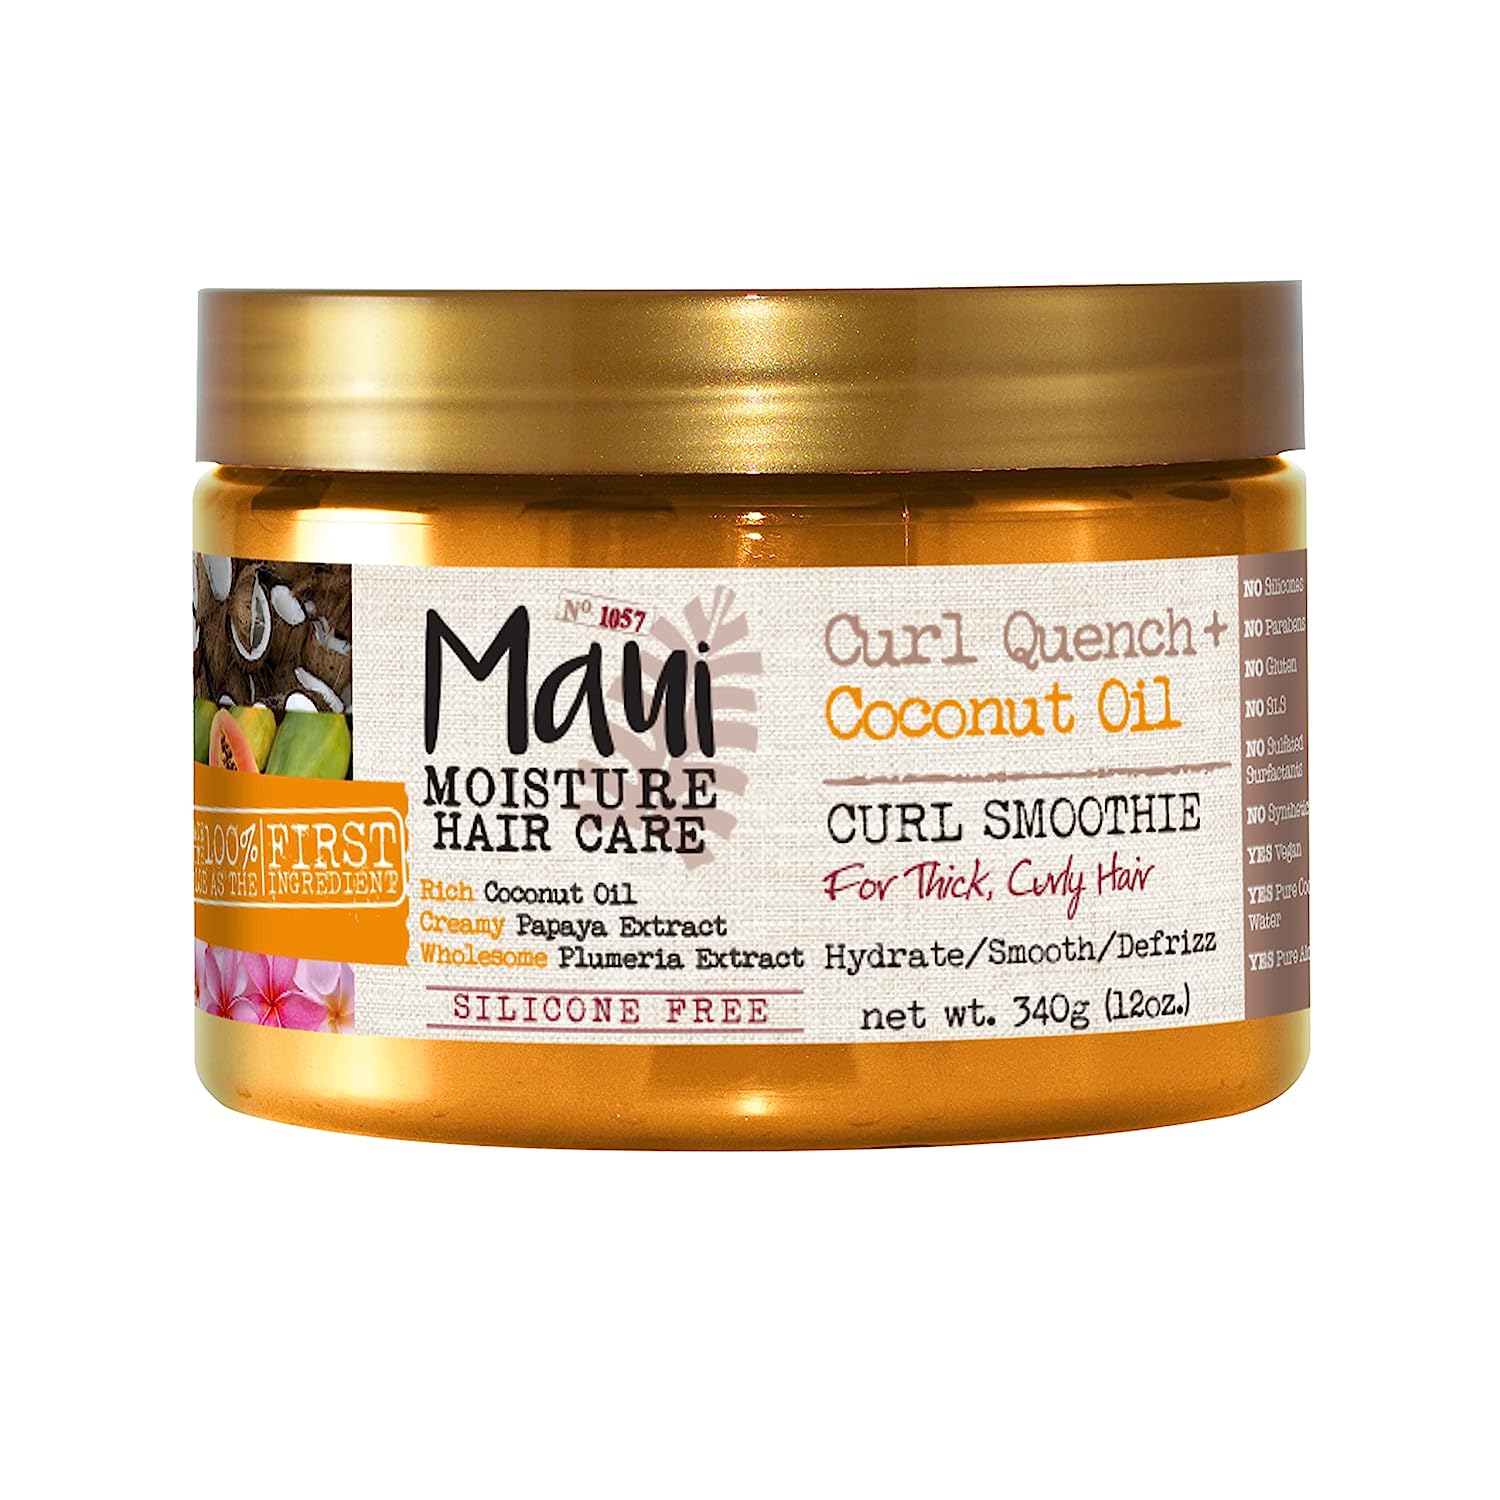 Maui Moisture Curl Quench + Coconut Oil Hydrating Curl [...]